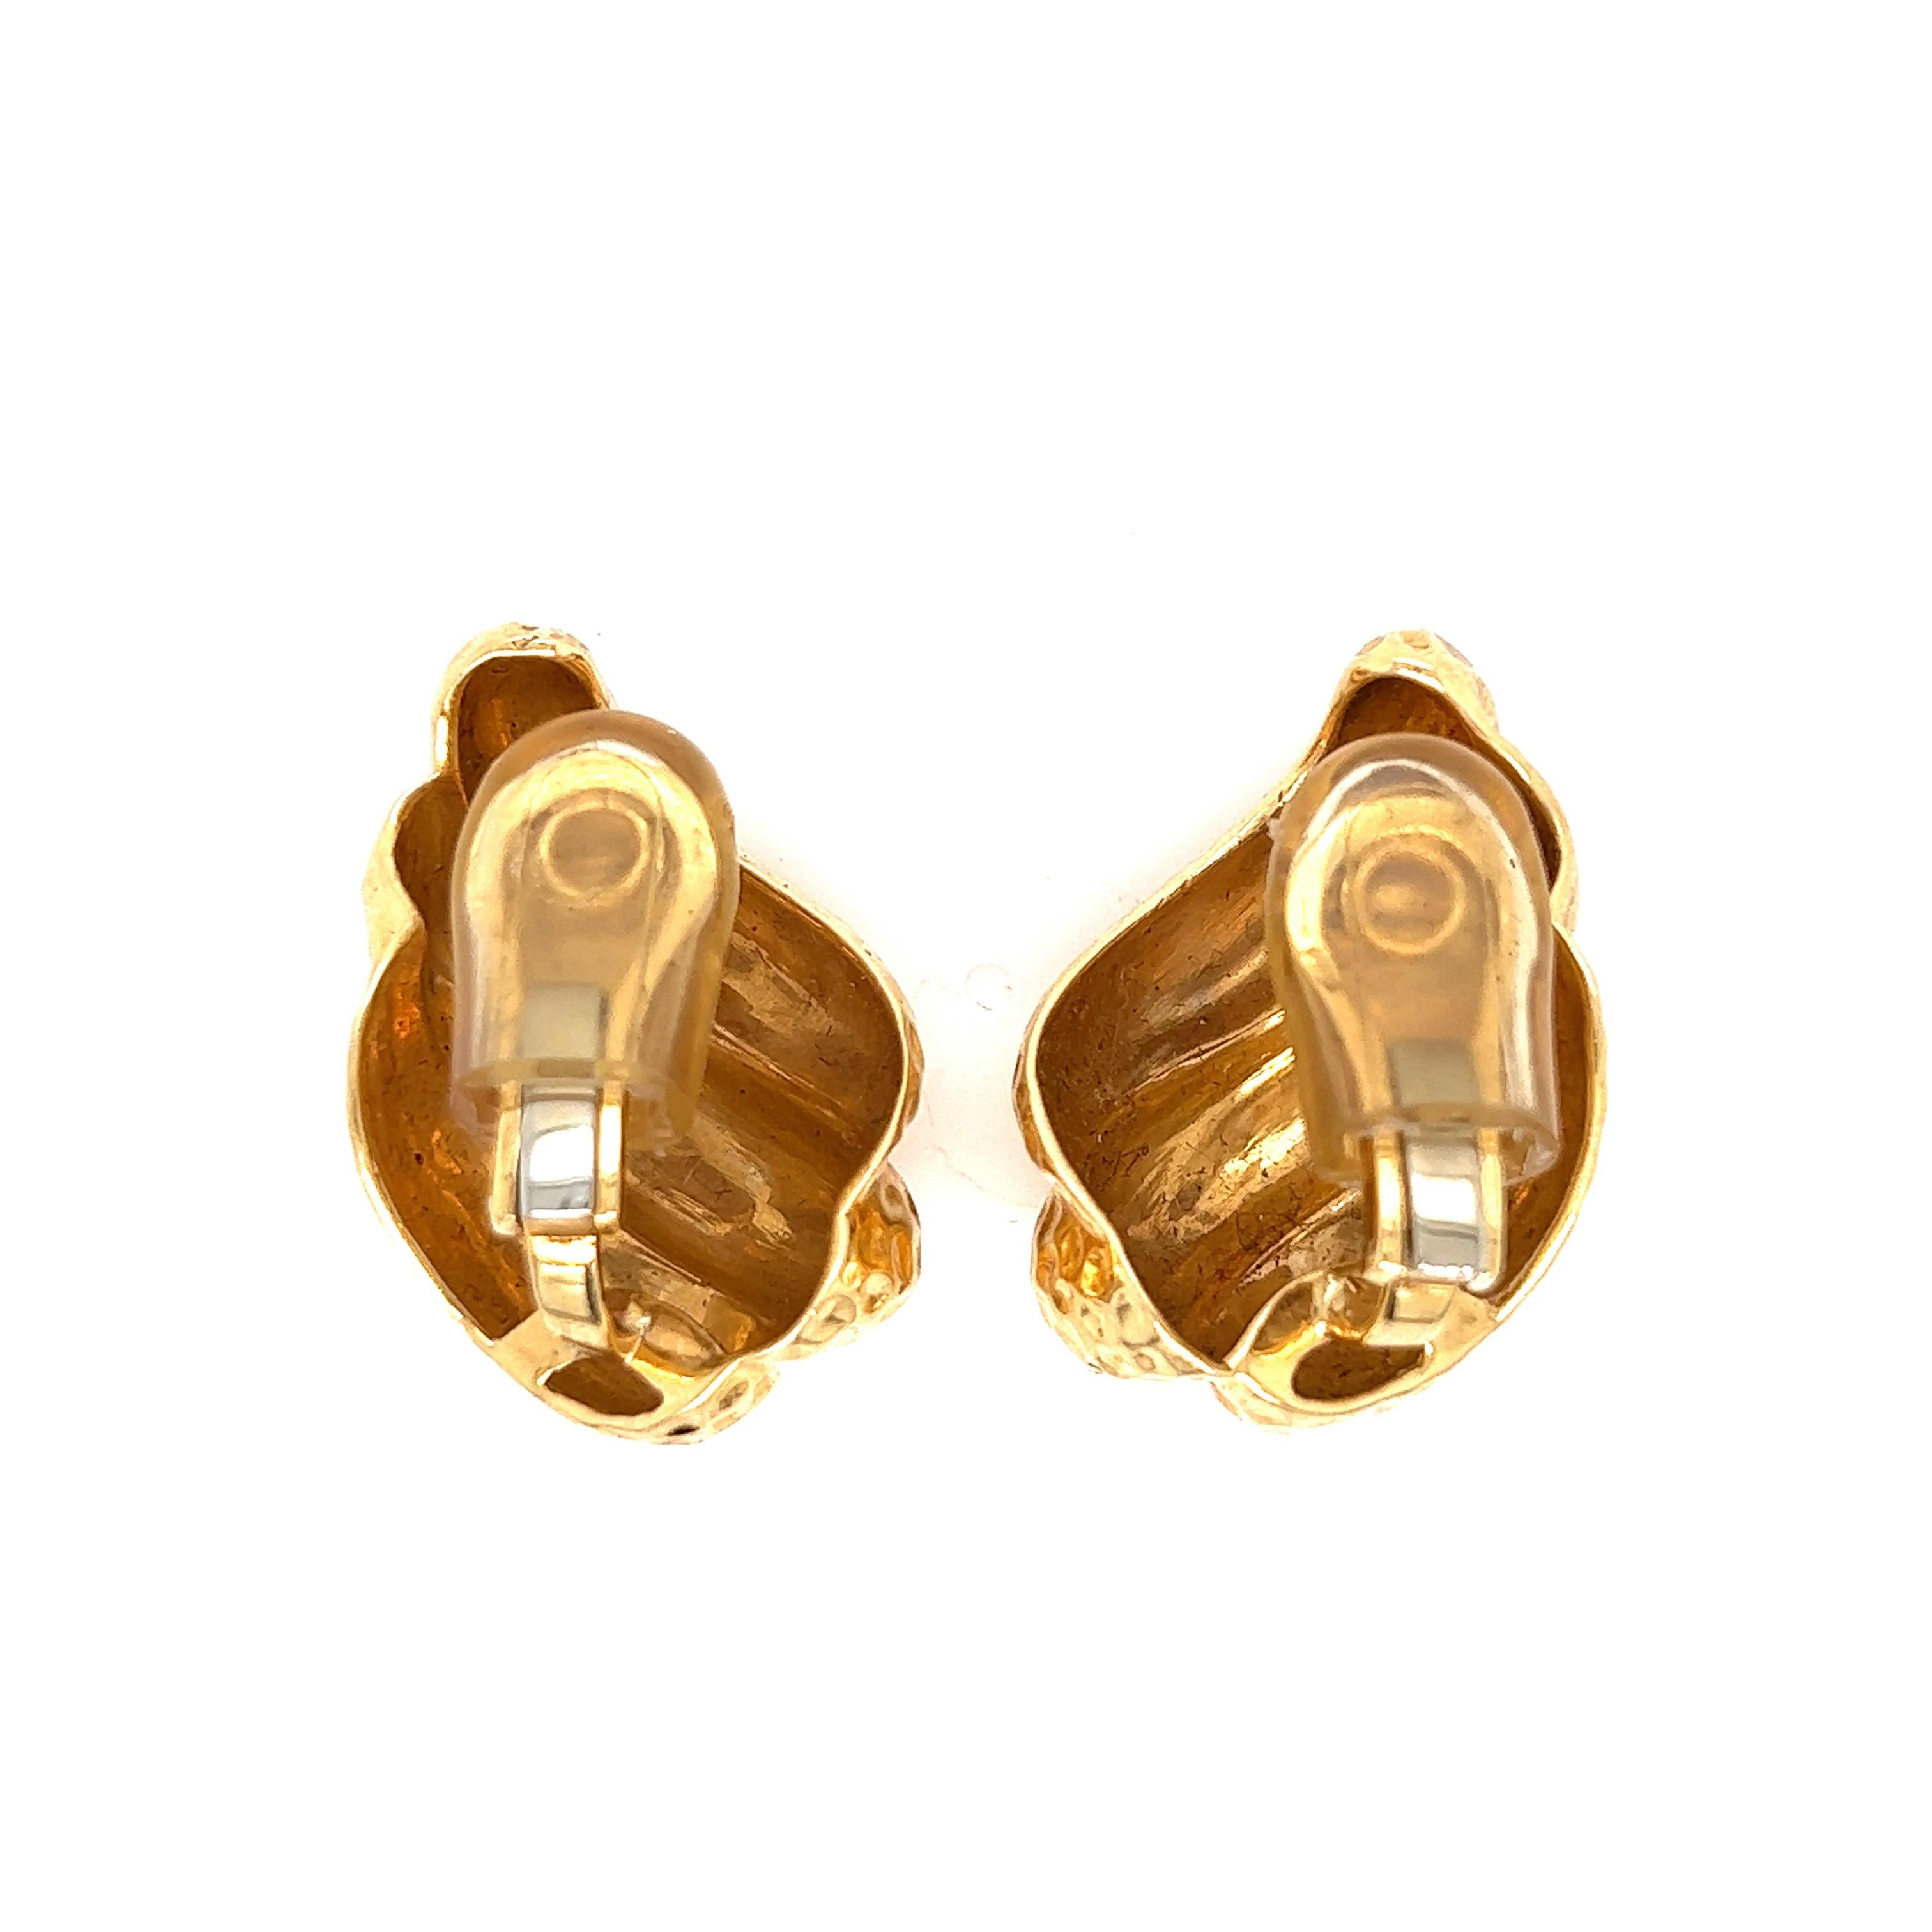 Gold hammered shell ear clips, 18 karat yellow gold 

Size: width 1 inch, length 1.25 inch
Total weight: 34.6 grams 